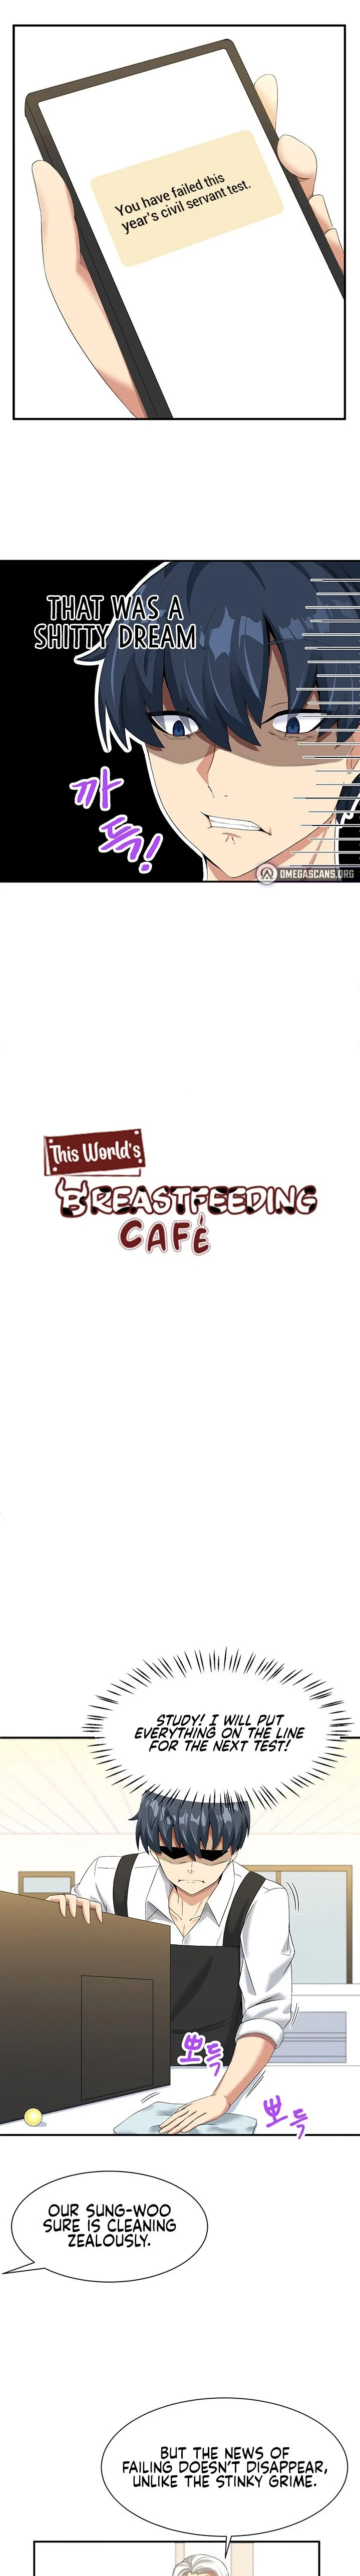 this-worlds-breastfeeding-cafe-chap-1-1